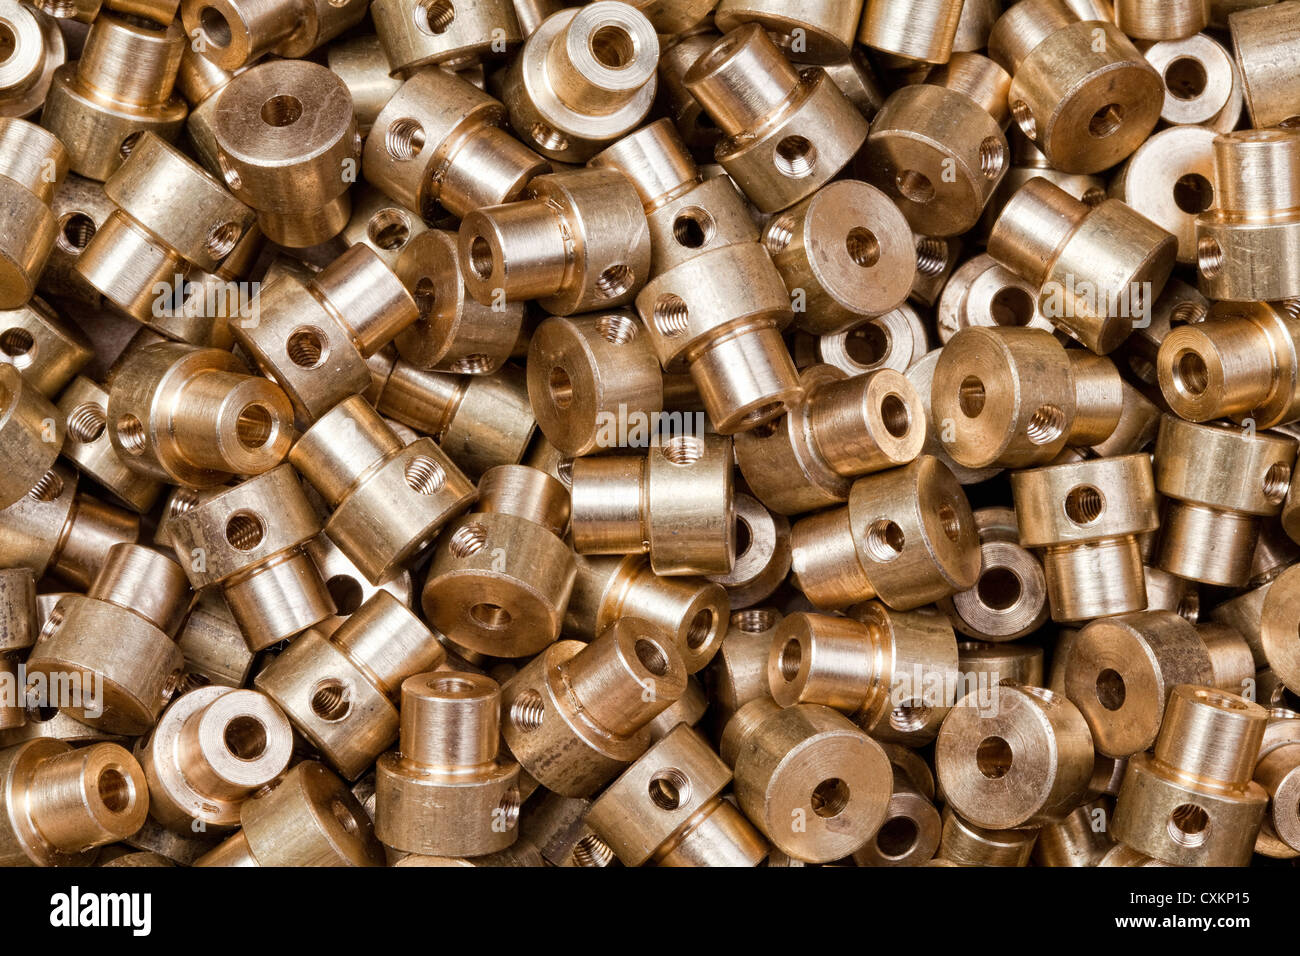 A pile of small, industrially produced parts made of brass Stock Photo